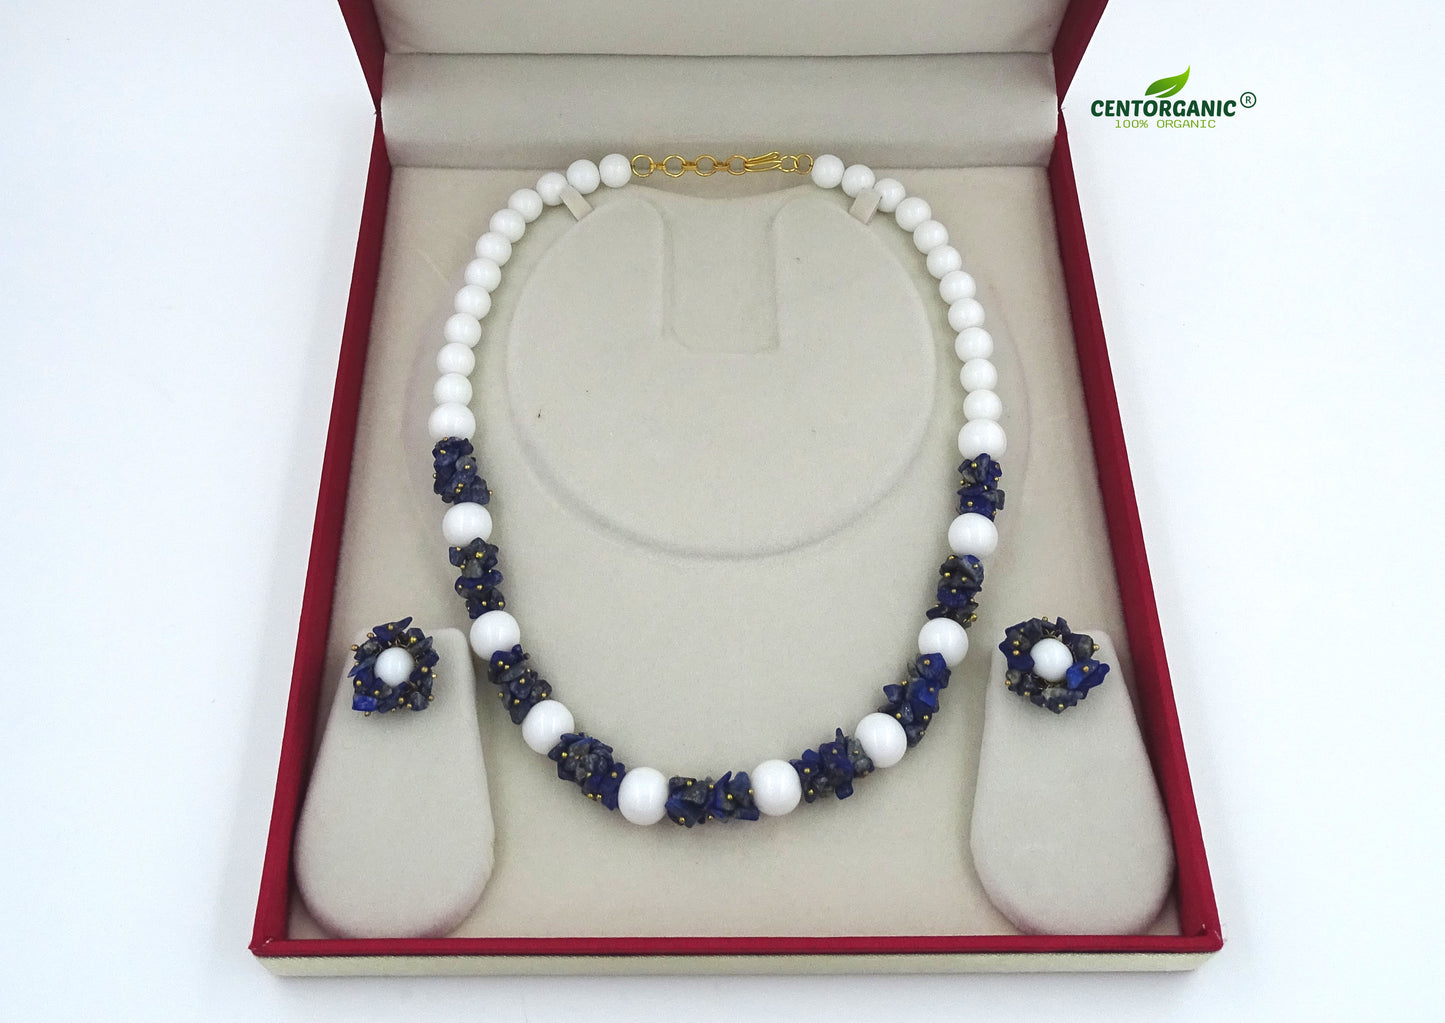 Centorganic - Semi Precious Gemstone Crystal Beads Necklace with Earring ,Lapis Lazuli Stone chip and white Jade length 16" Mala for Girl and Women Fashion Jewellery, with beautiful jewellery box for gifting.